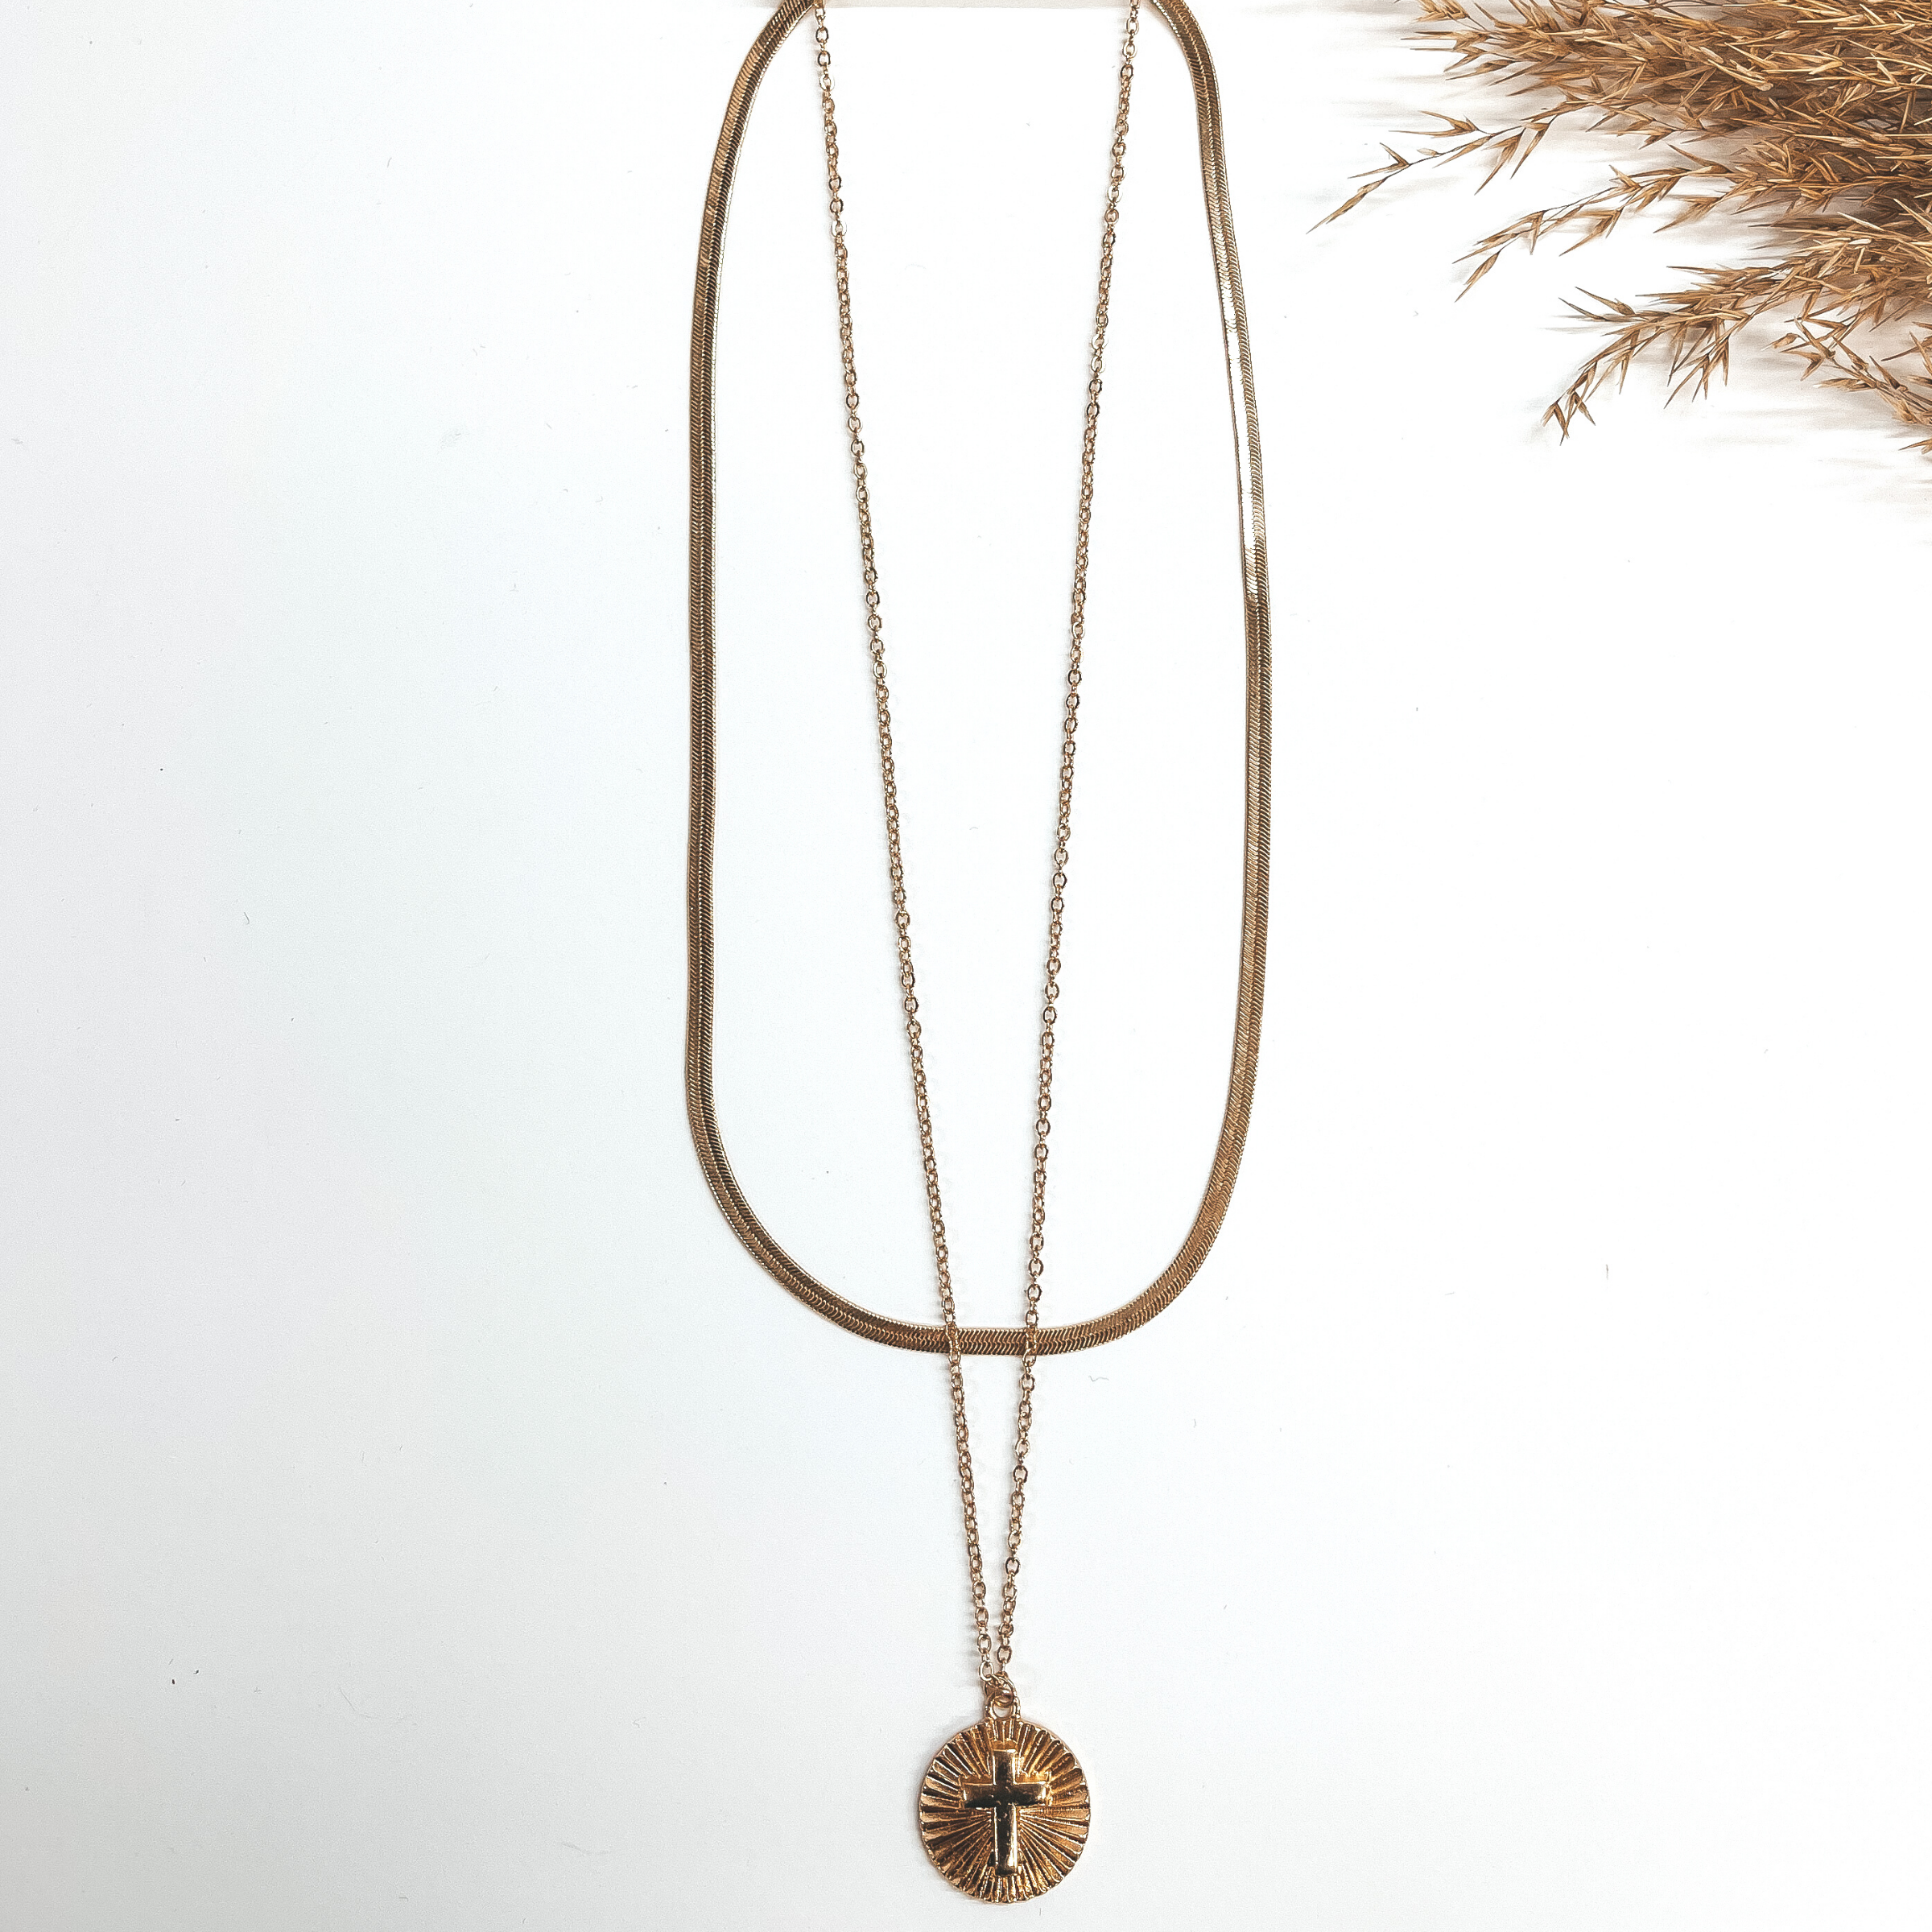 This is a double chained necklace in gold with a  circle pendant. The shorter chain is a snake chain,  the longer chain has a circle sunburst pendant with  a cross. This is taken on a white background and a  brown plant in the side.